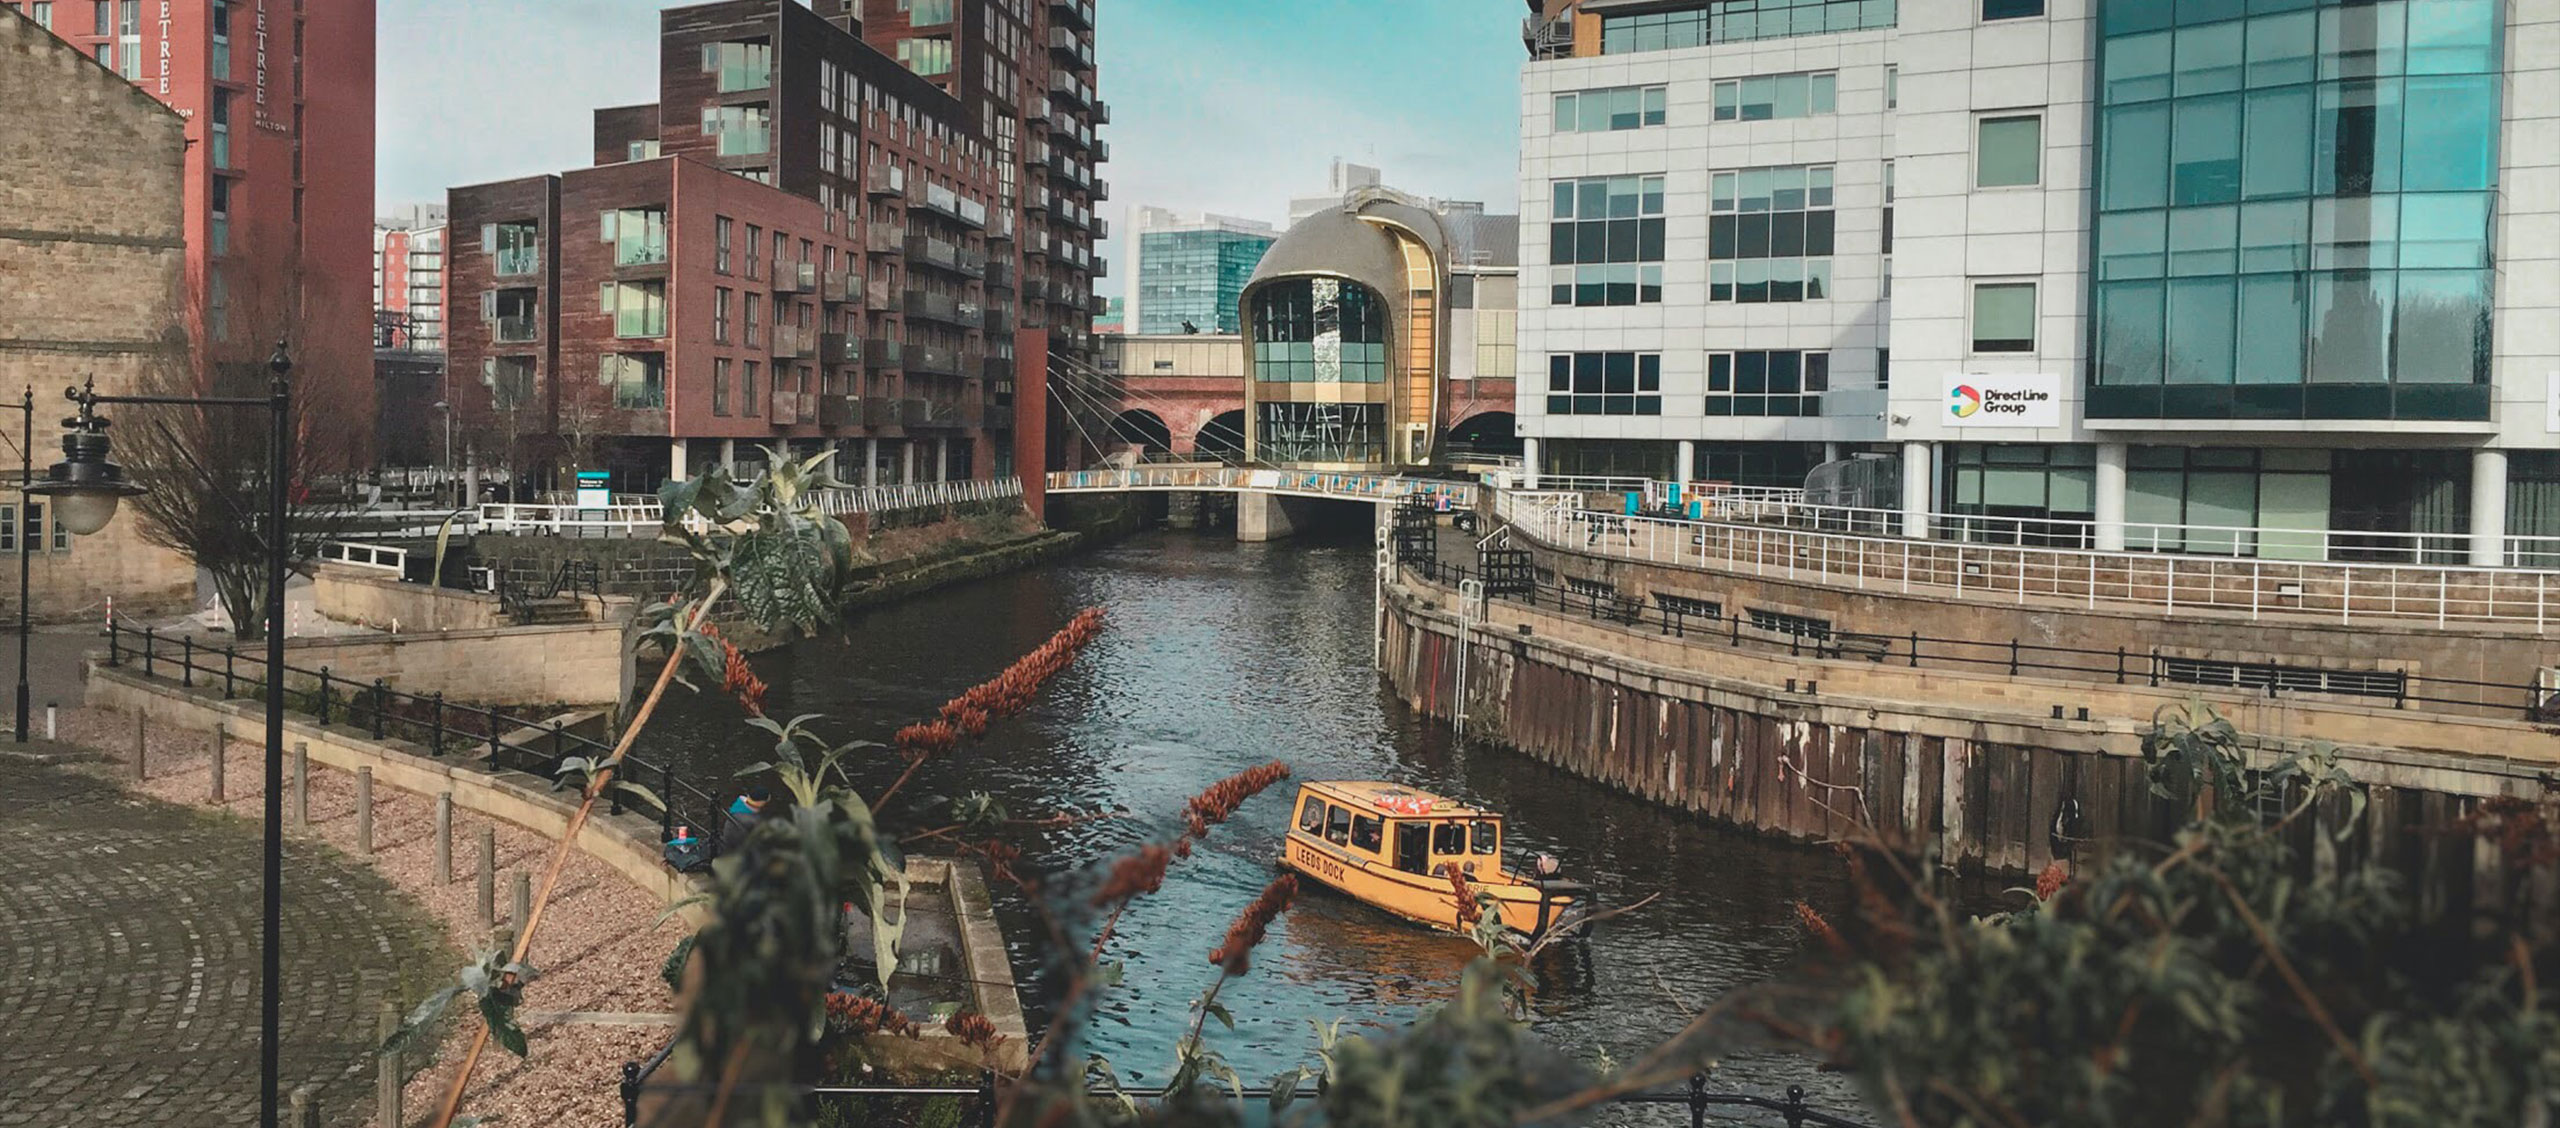 Buildings Next To River Aire in Leeds City Centre